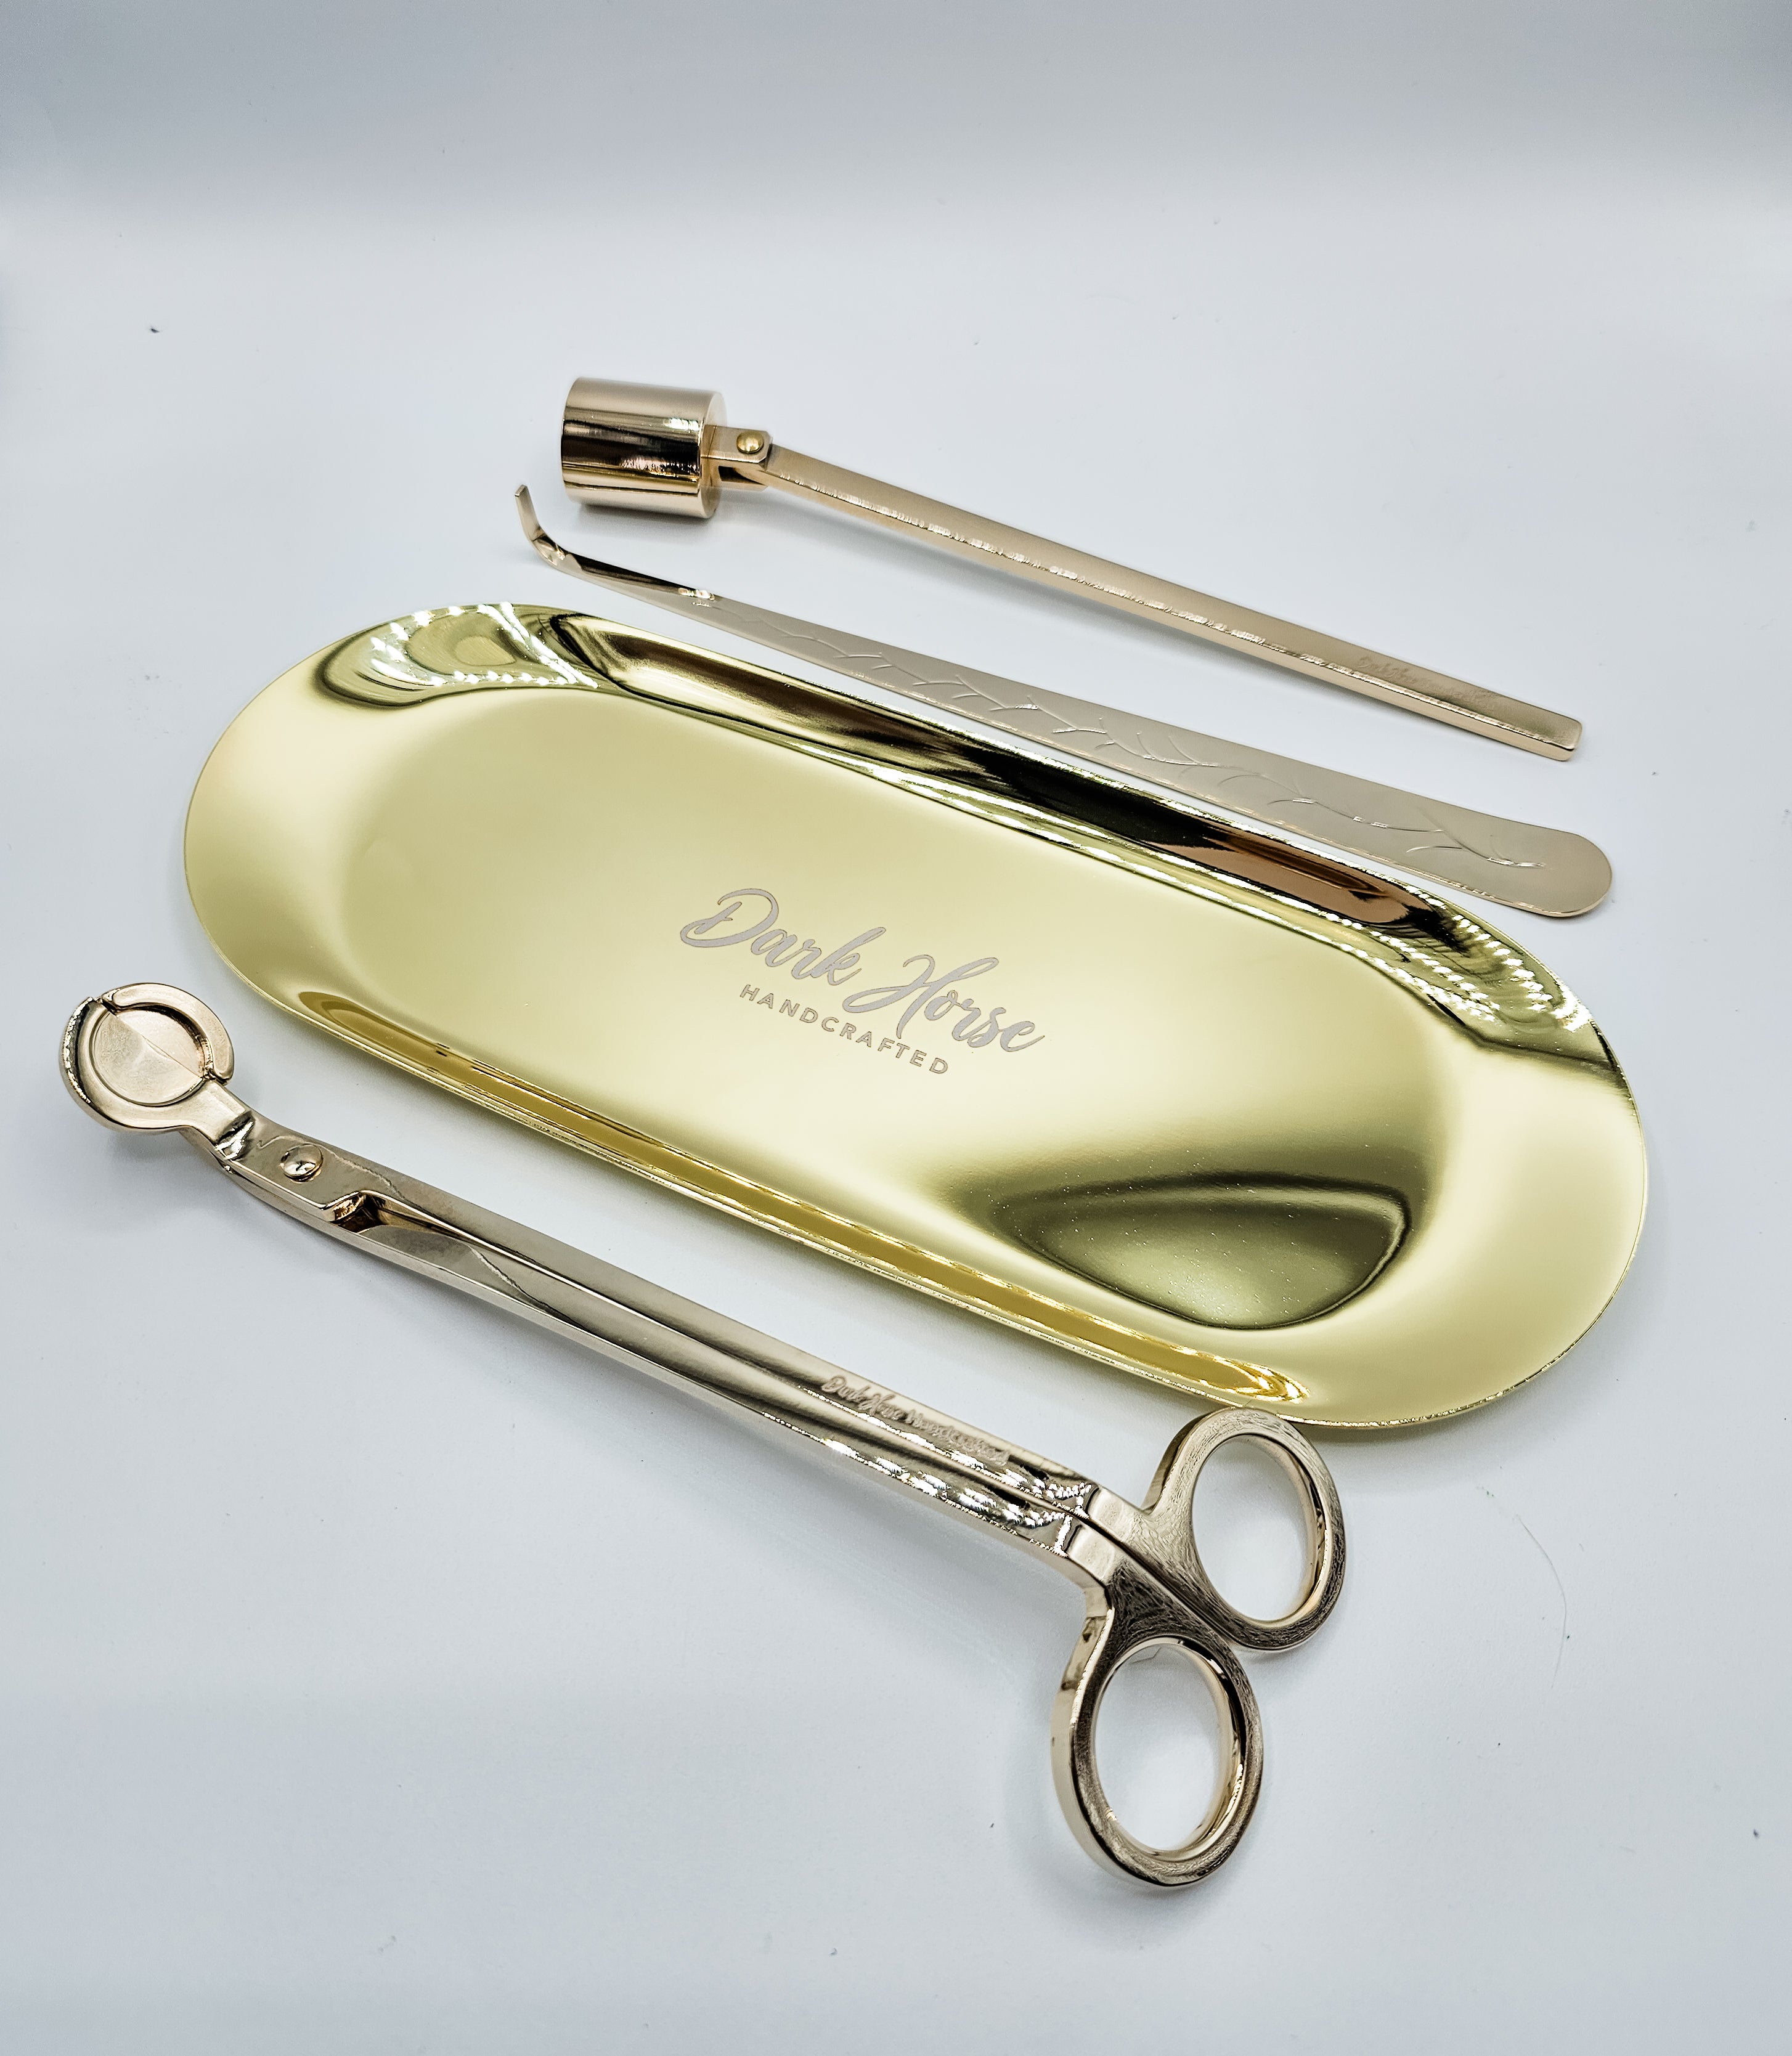 Gold candle accessory kit which includes tray, snuffer, wick dipper & wick trimmer.